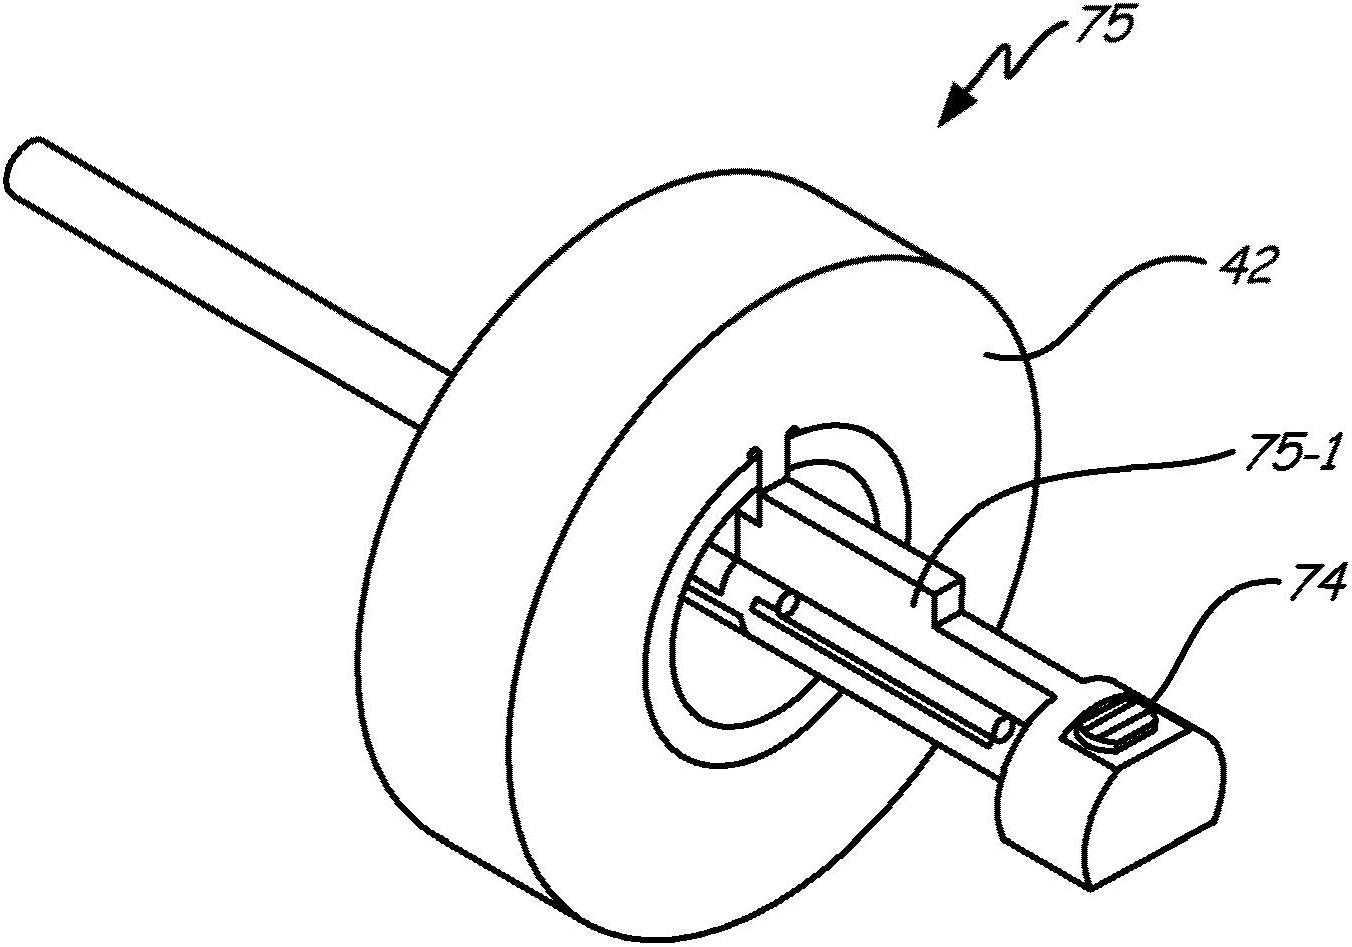 Integrated viscous clutch